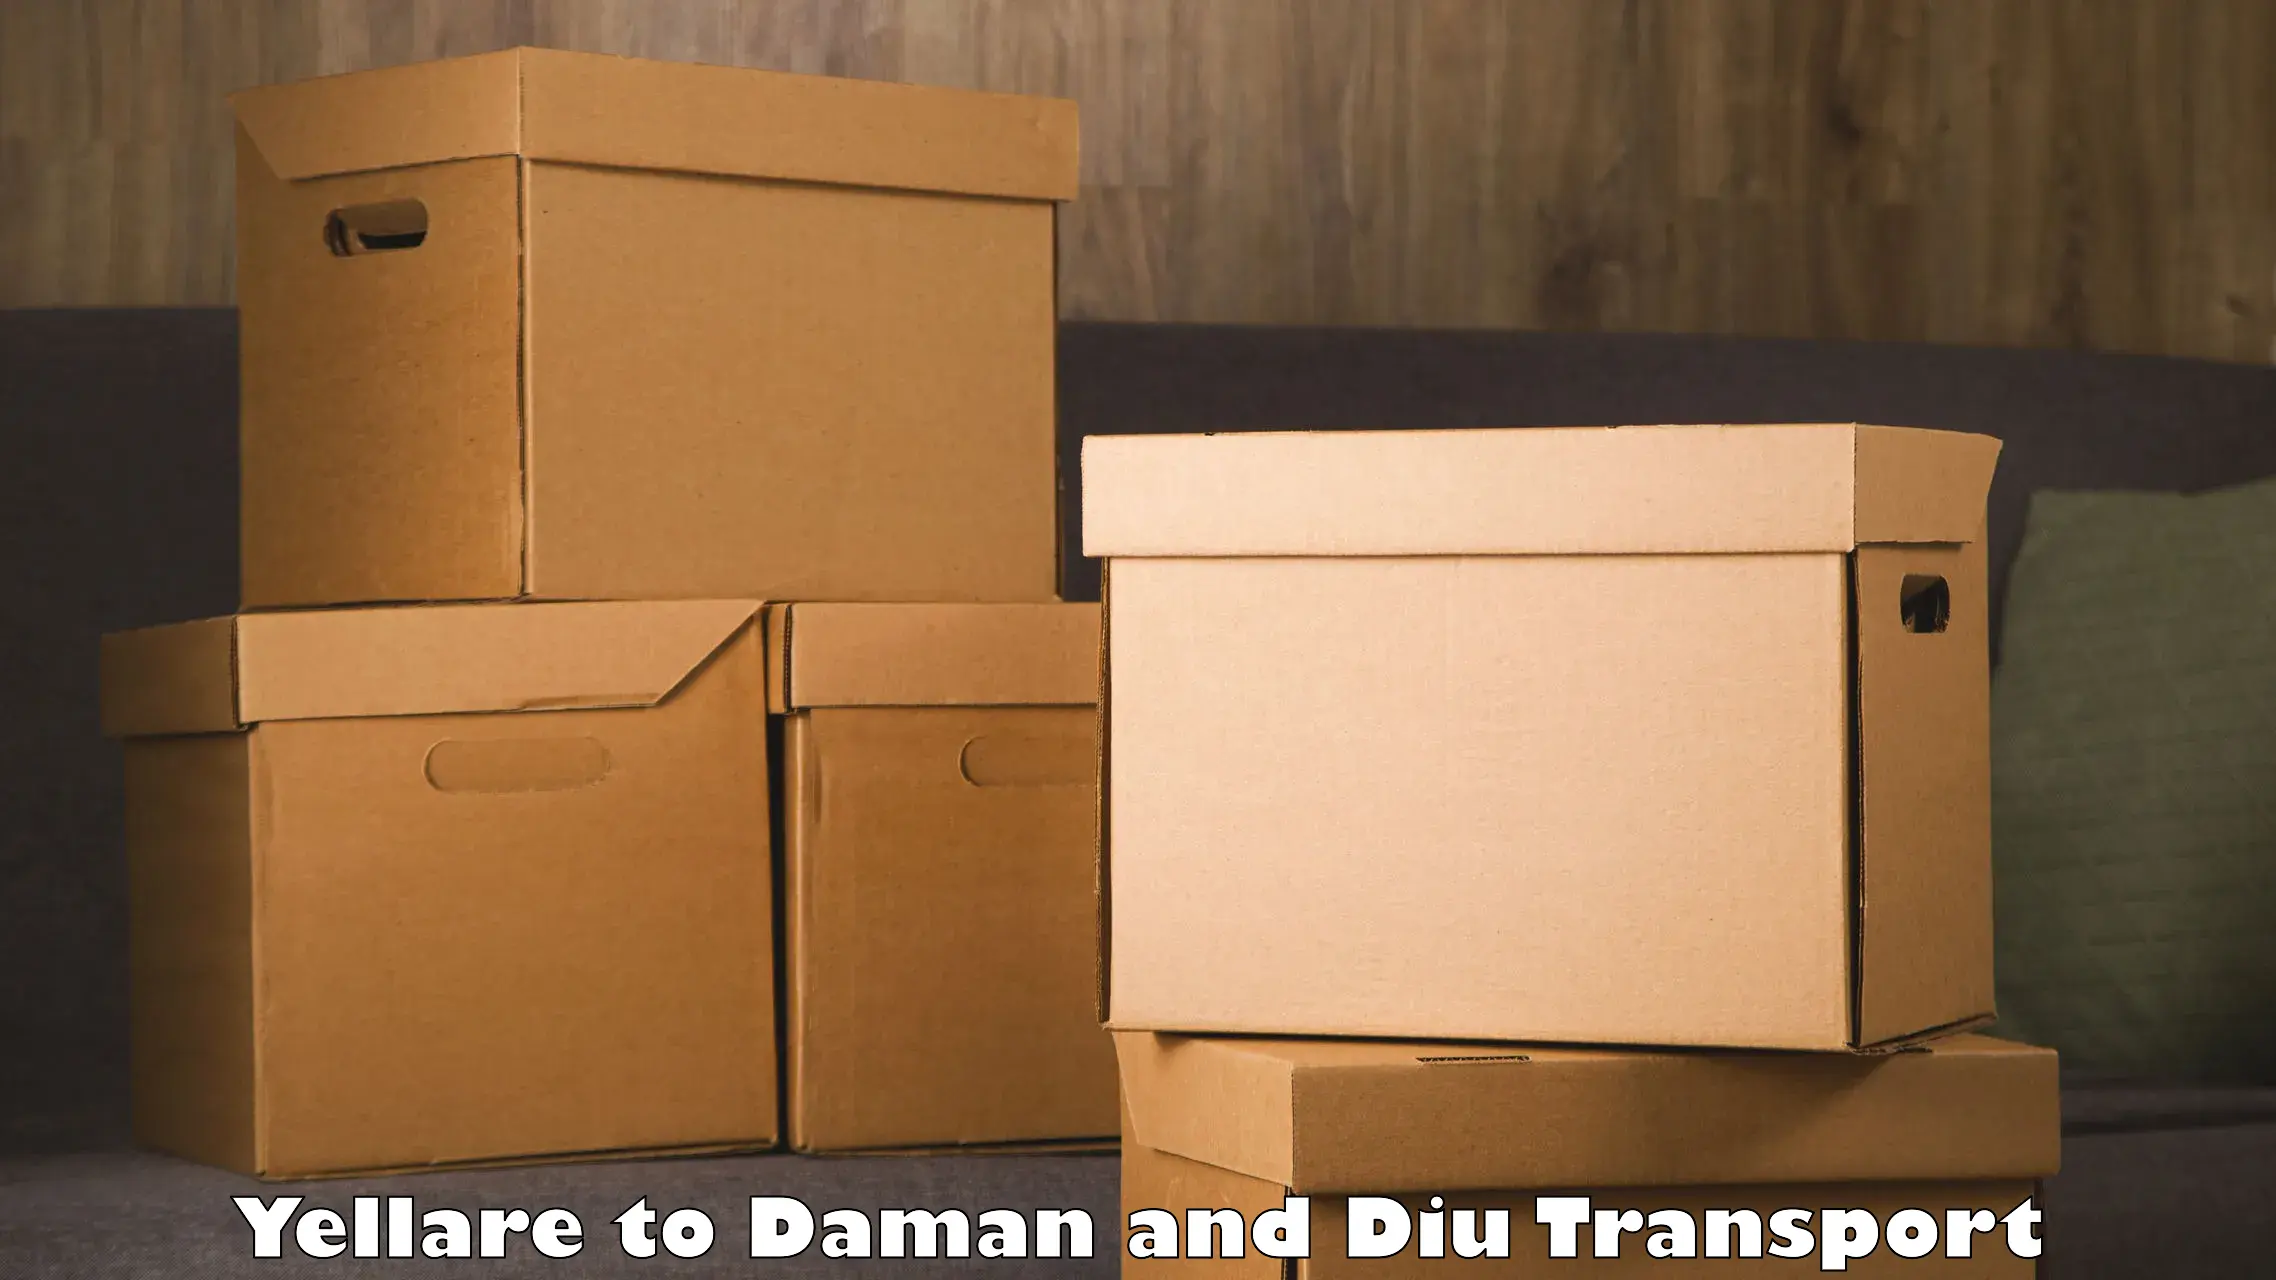 Two wheeler parcel service in Yellare to Daman and Diu